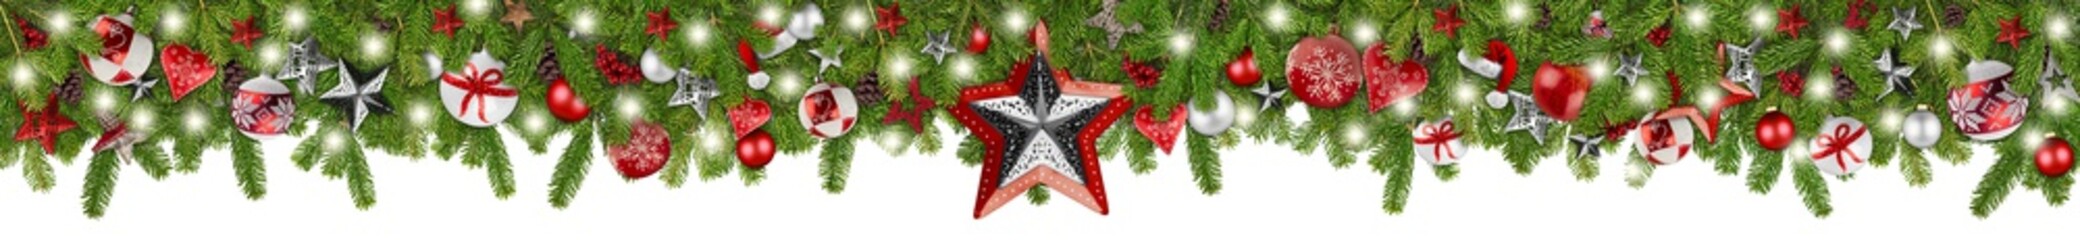 christmas garland super wide panorama banner with fir branches red silver stars lights and baubles...